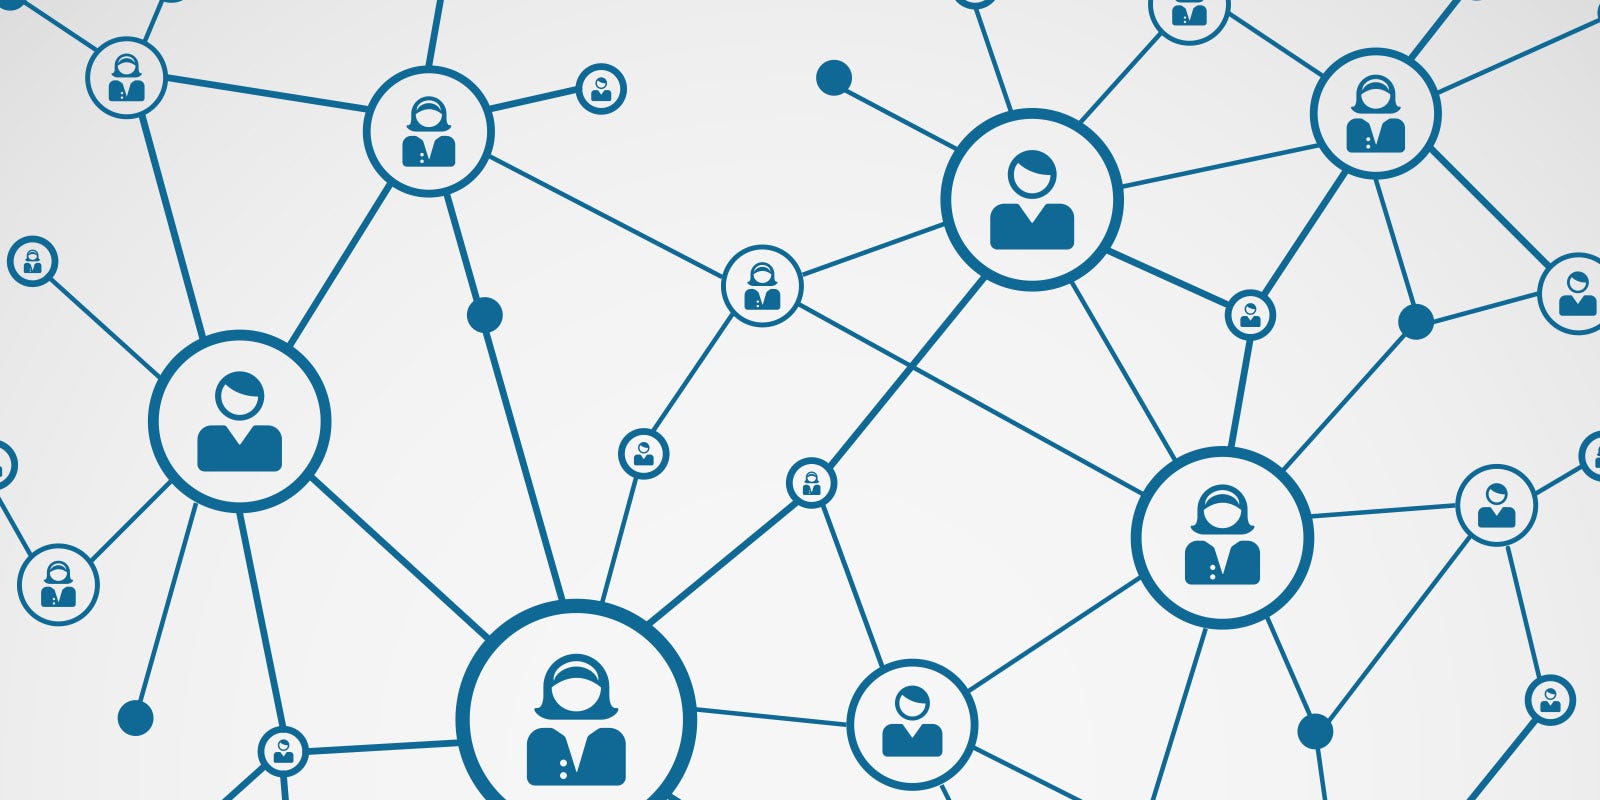 What every aspiring data scientist needs to know about networking